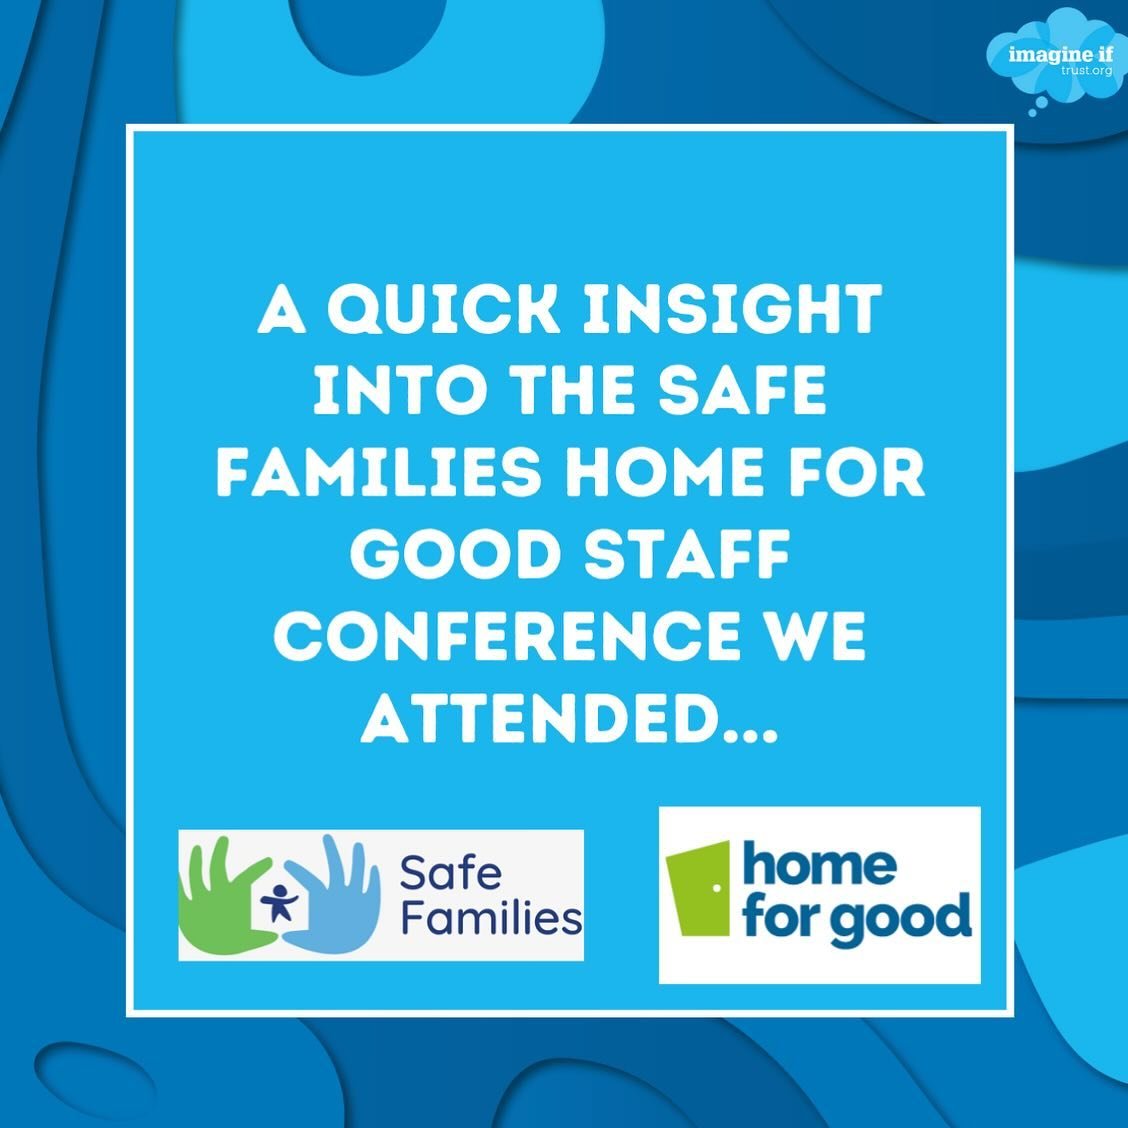 We had the brilliant time at the Safe Families Home For Good staff conference.

Thank you for having us @safefamiliesuk 

#belongingtogetherconf #safefamilies #homeforgood #imagineif